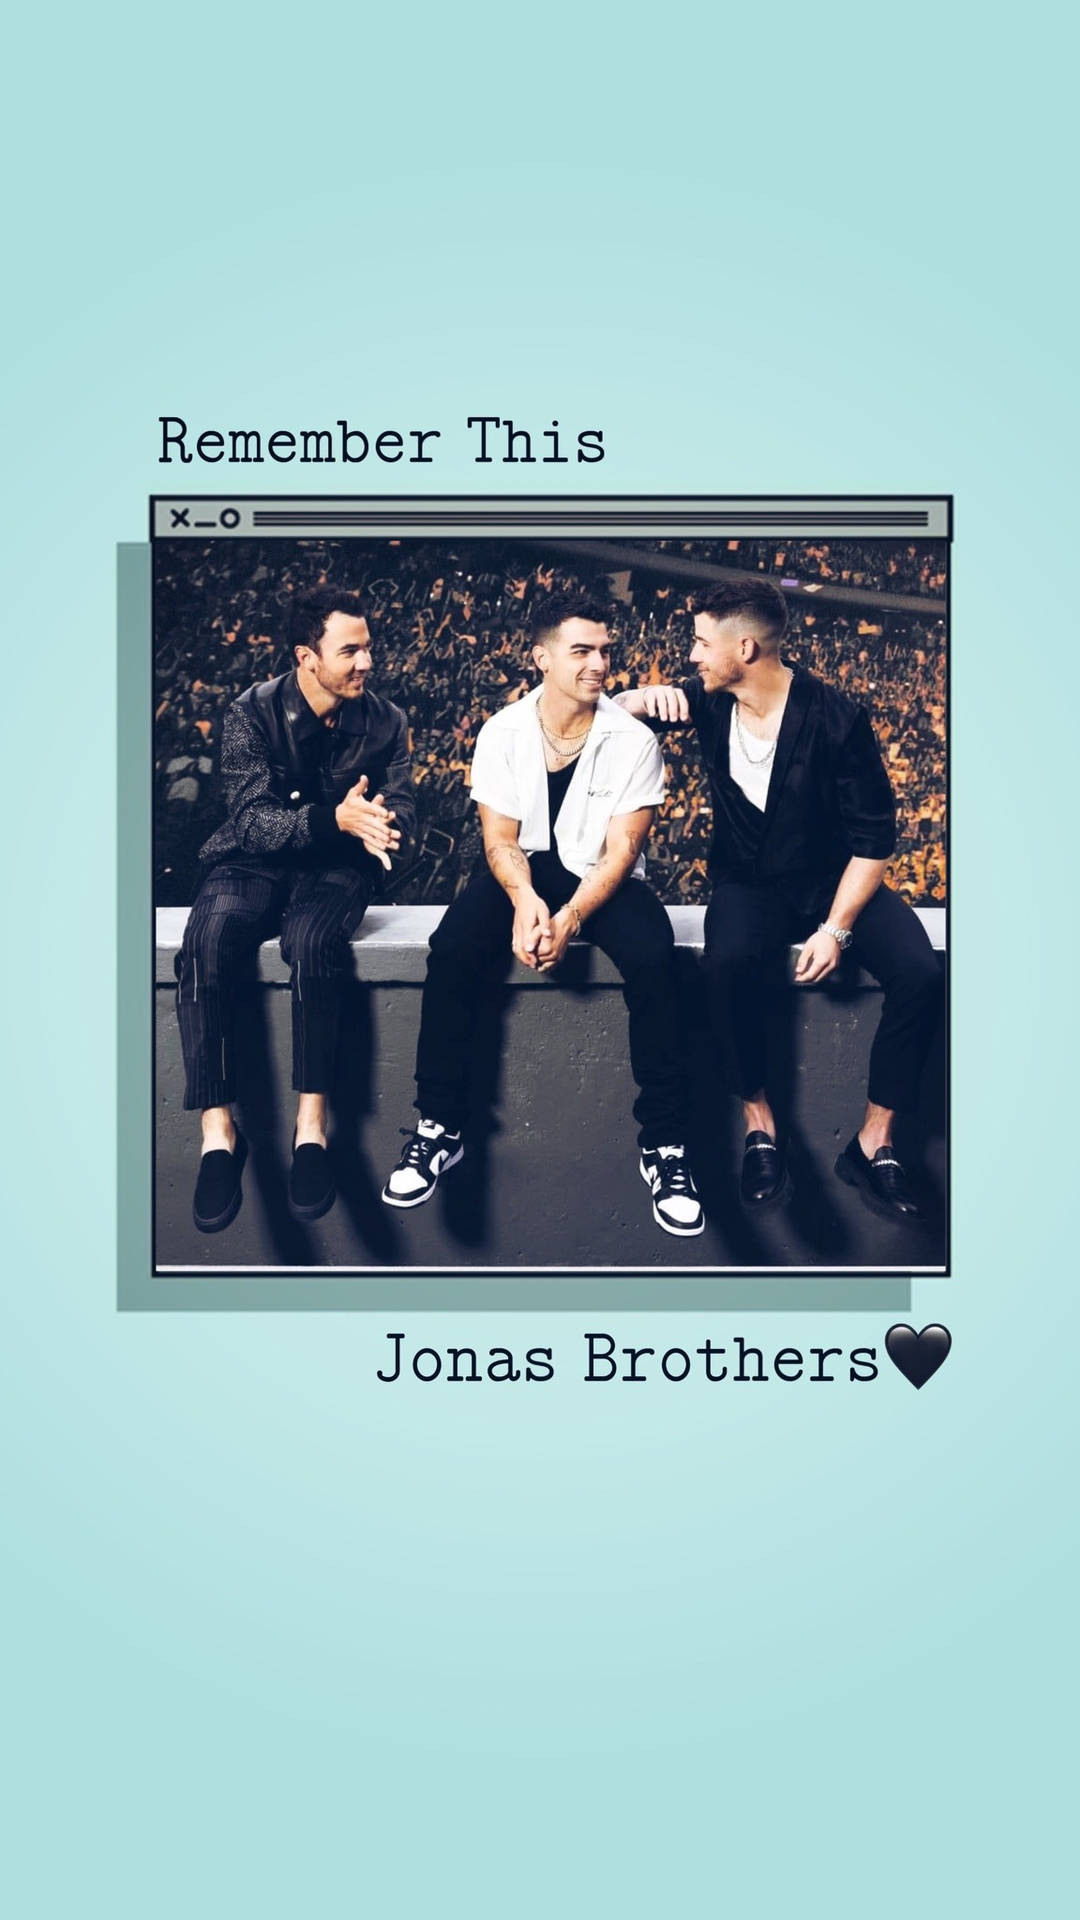 Jonas Brothers Remember This Tour Poster Wallpaper